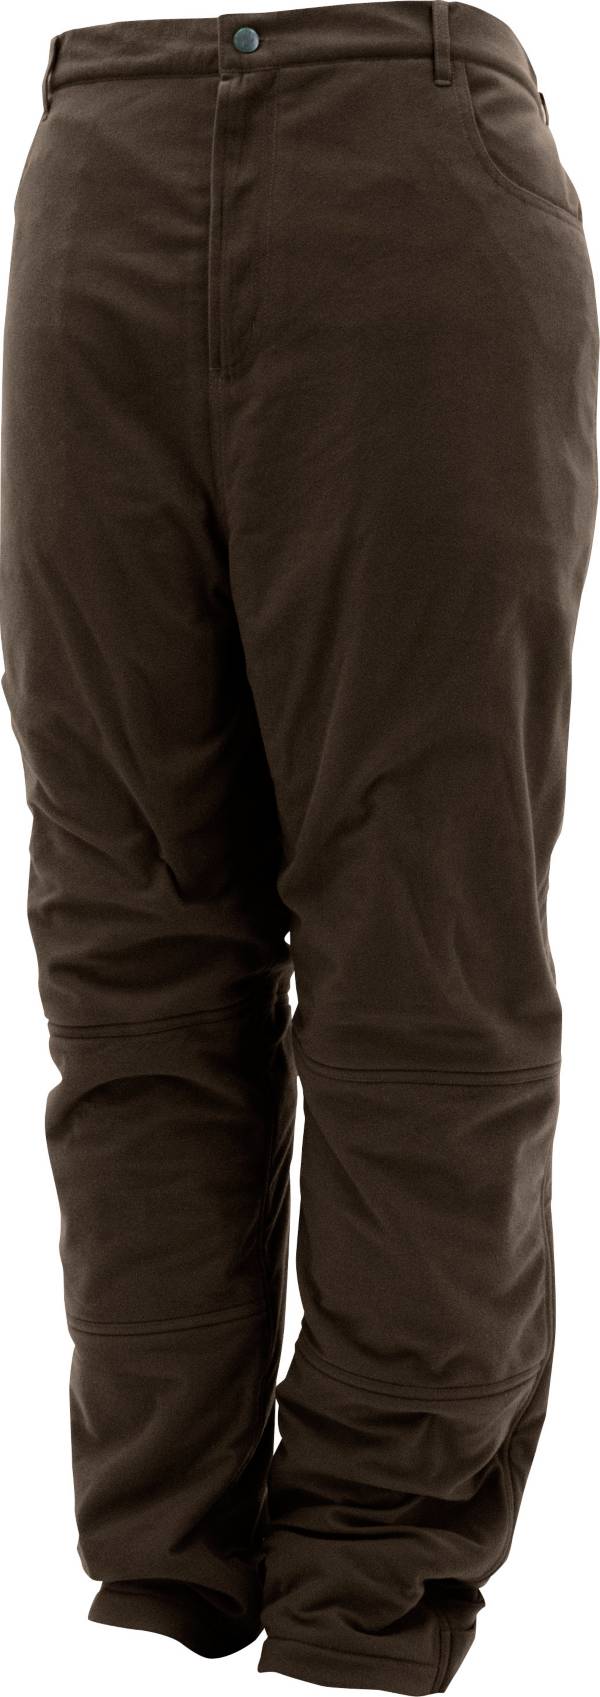 frogg toggs Men's frogg Fleece Lined Wader Pants product image